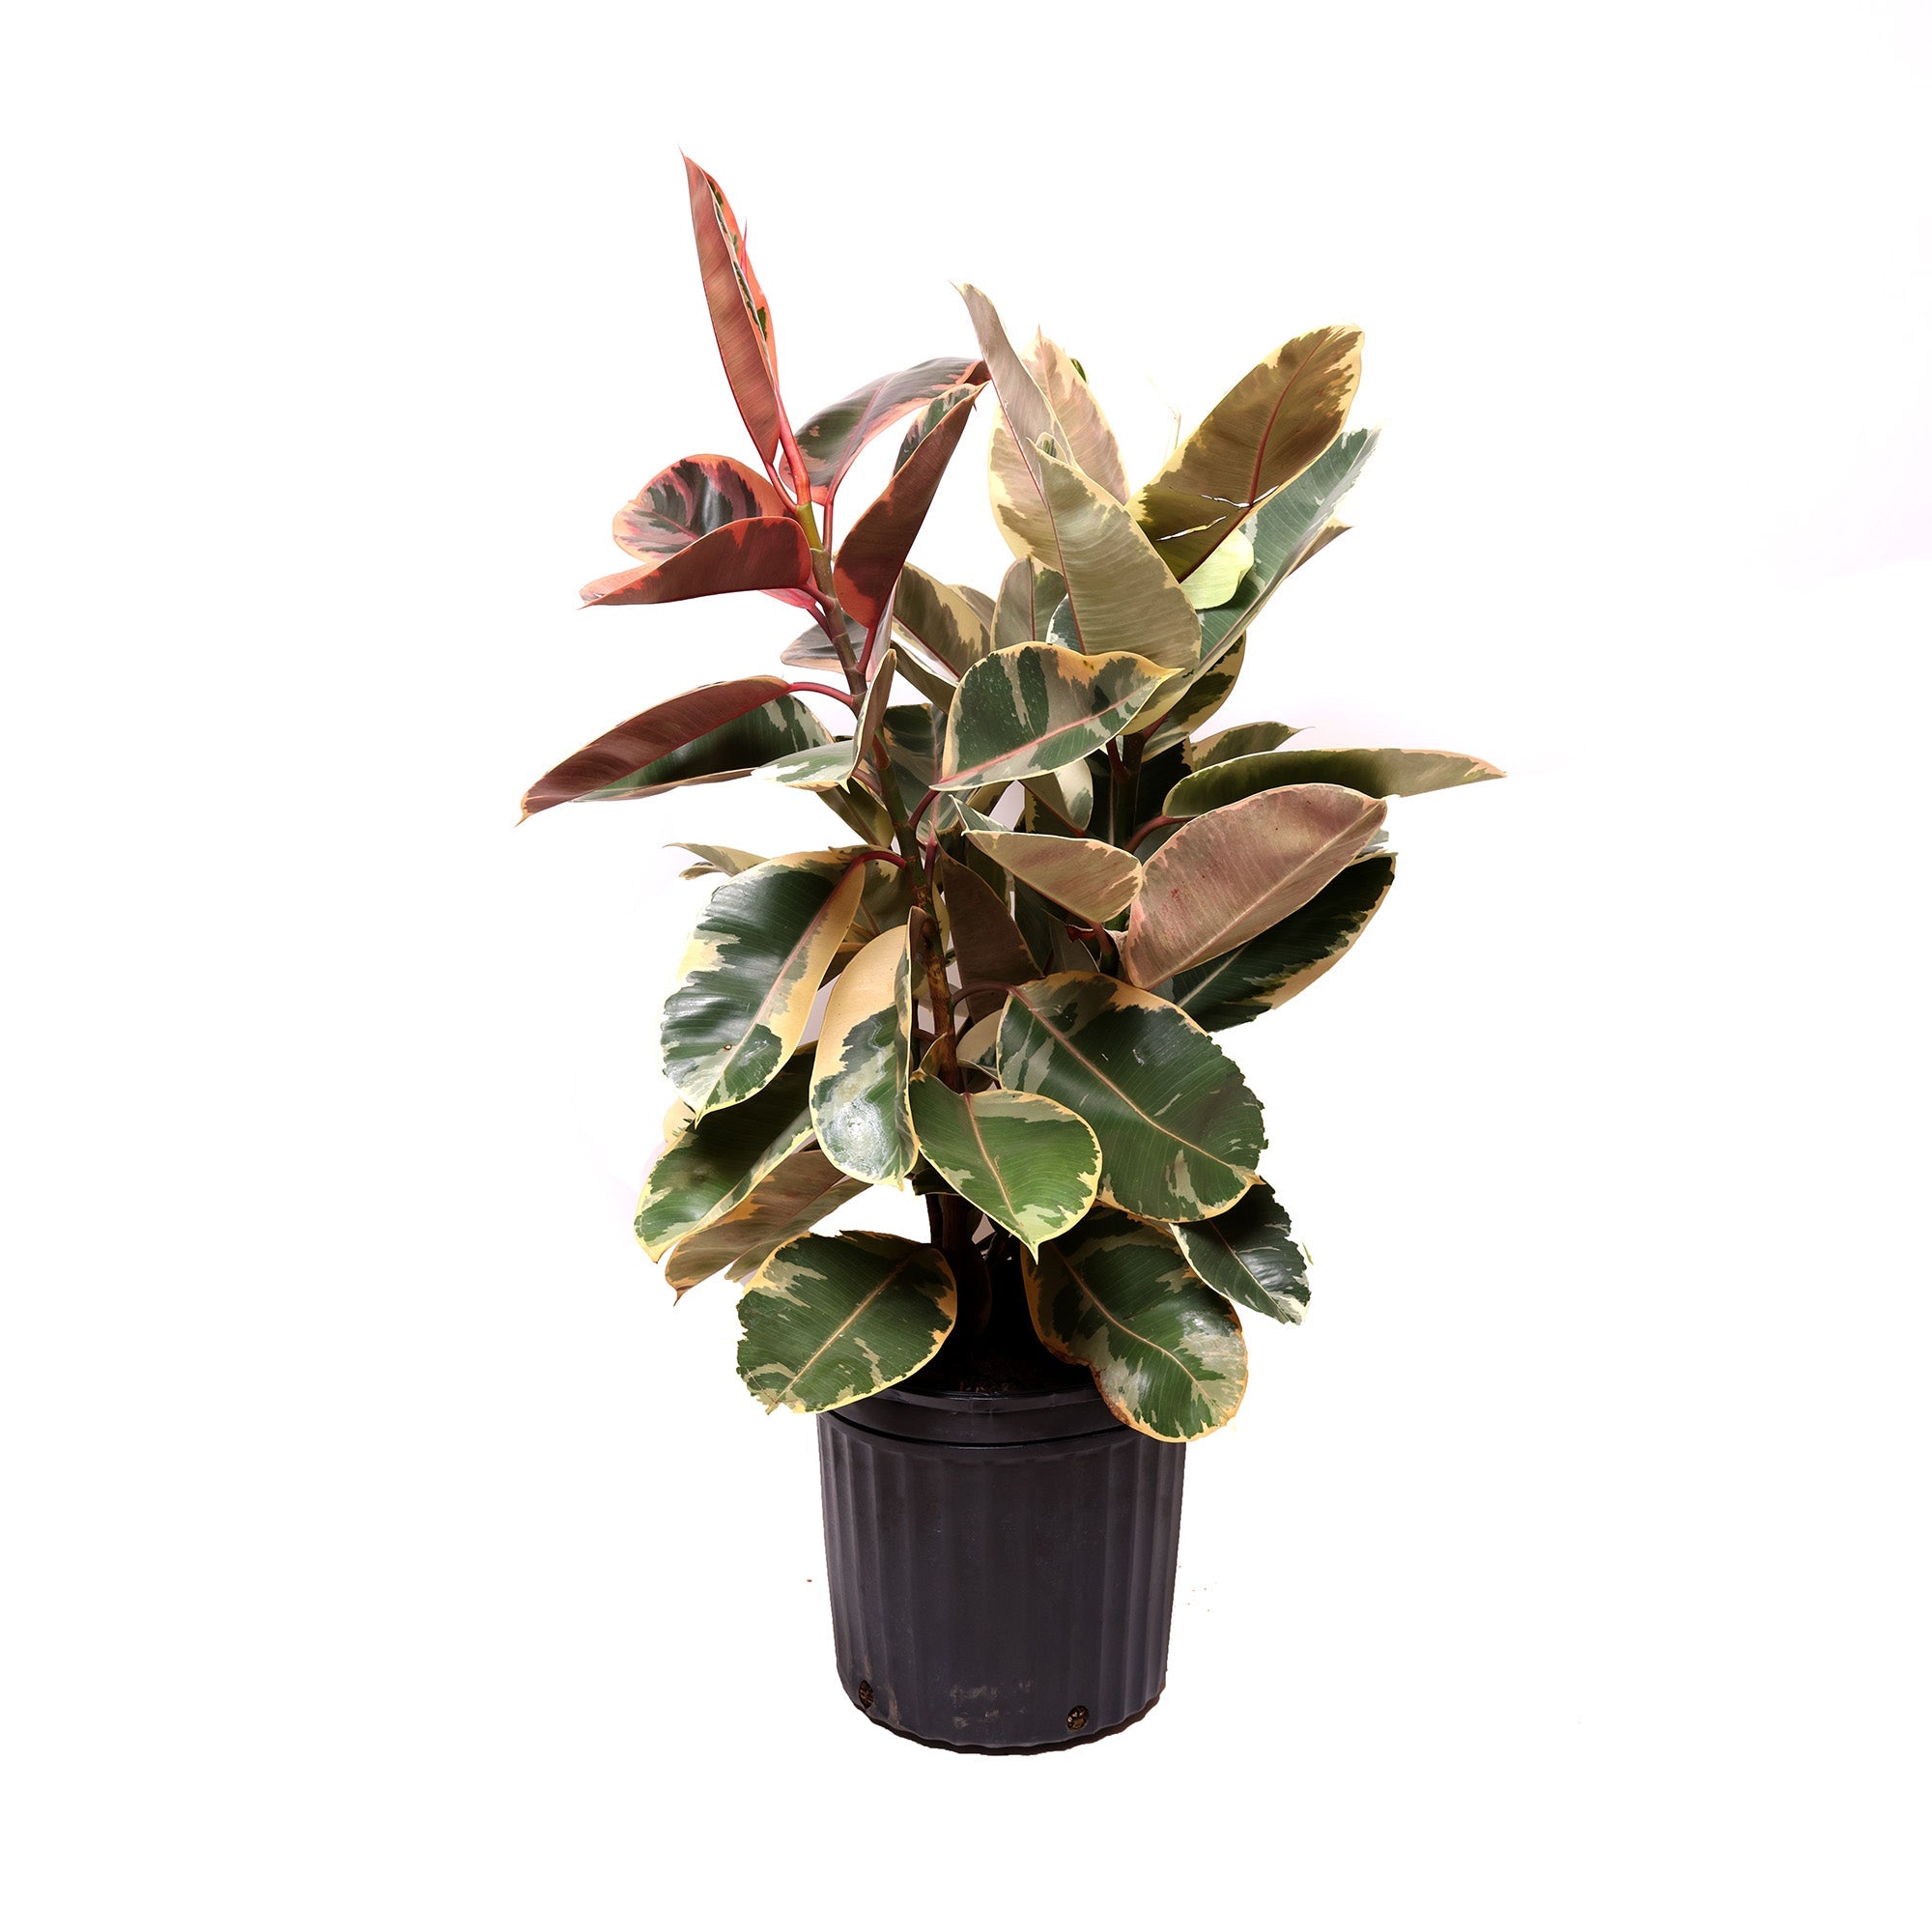 A Ficus Tineke 12 Inches plant with glossy variegated leaves in shades of dark green and cream, featuring red accents, standing in a black pot against a white background.